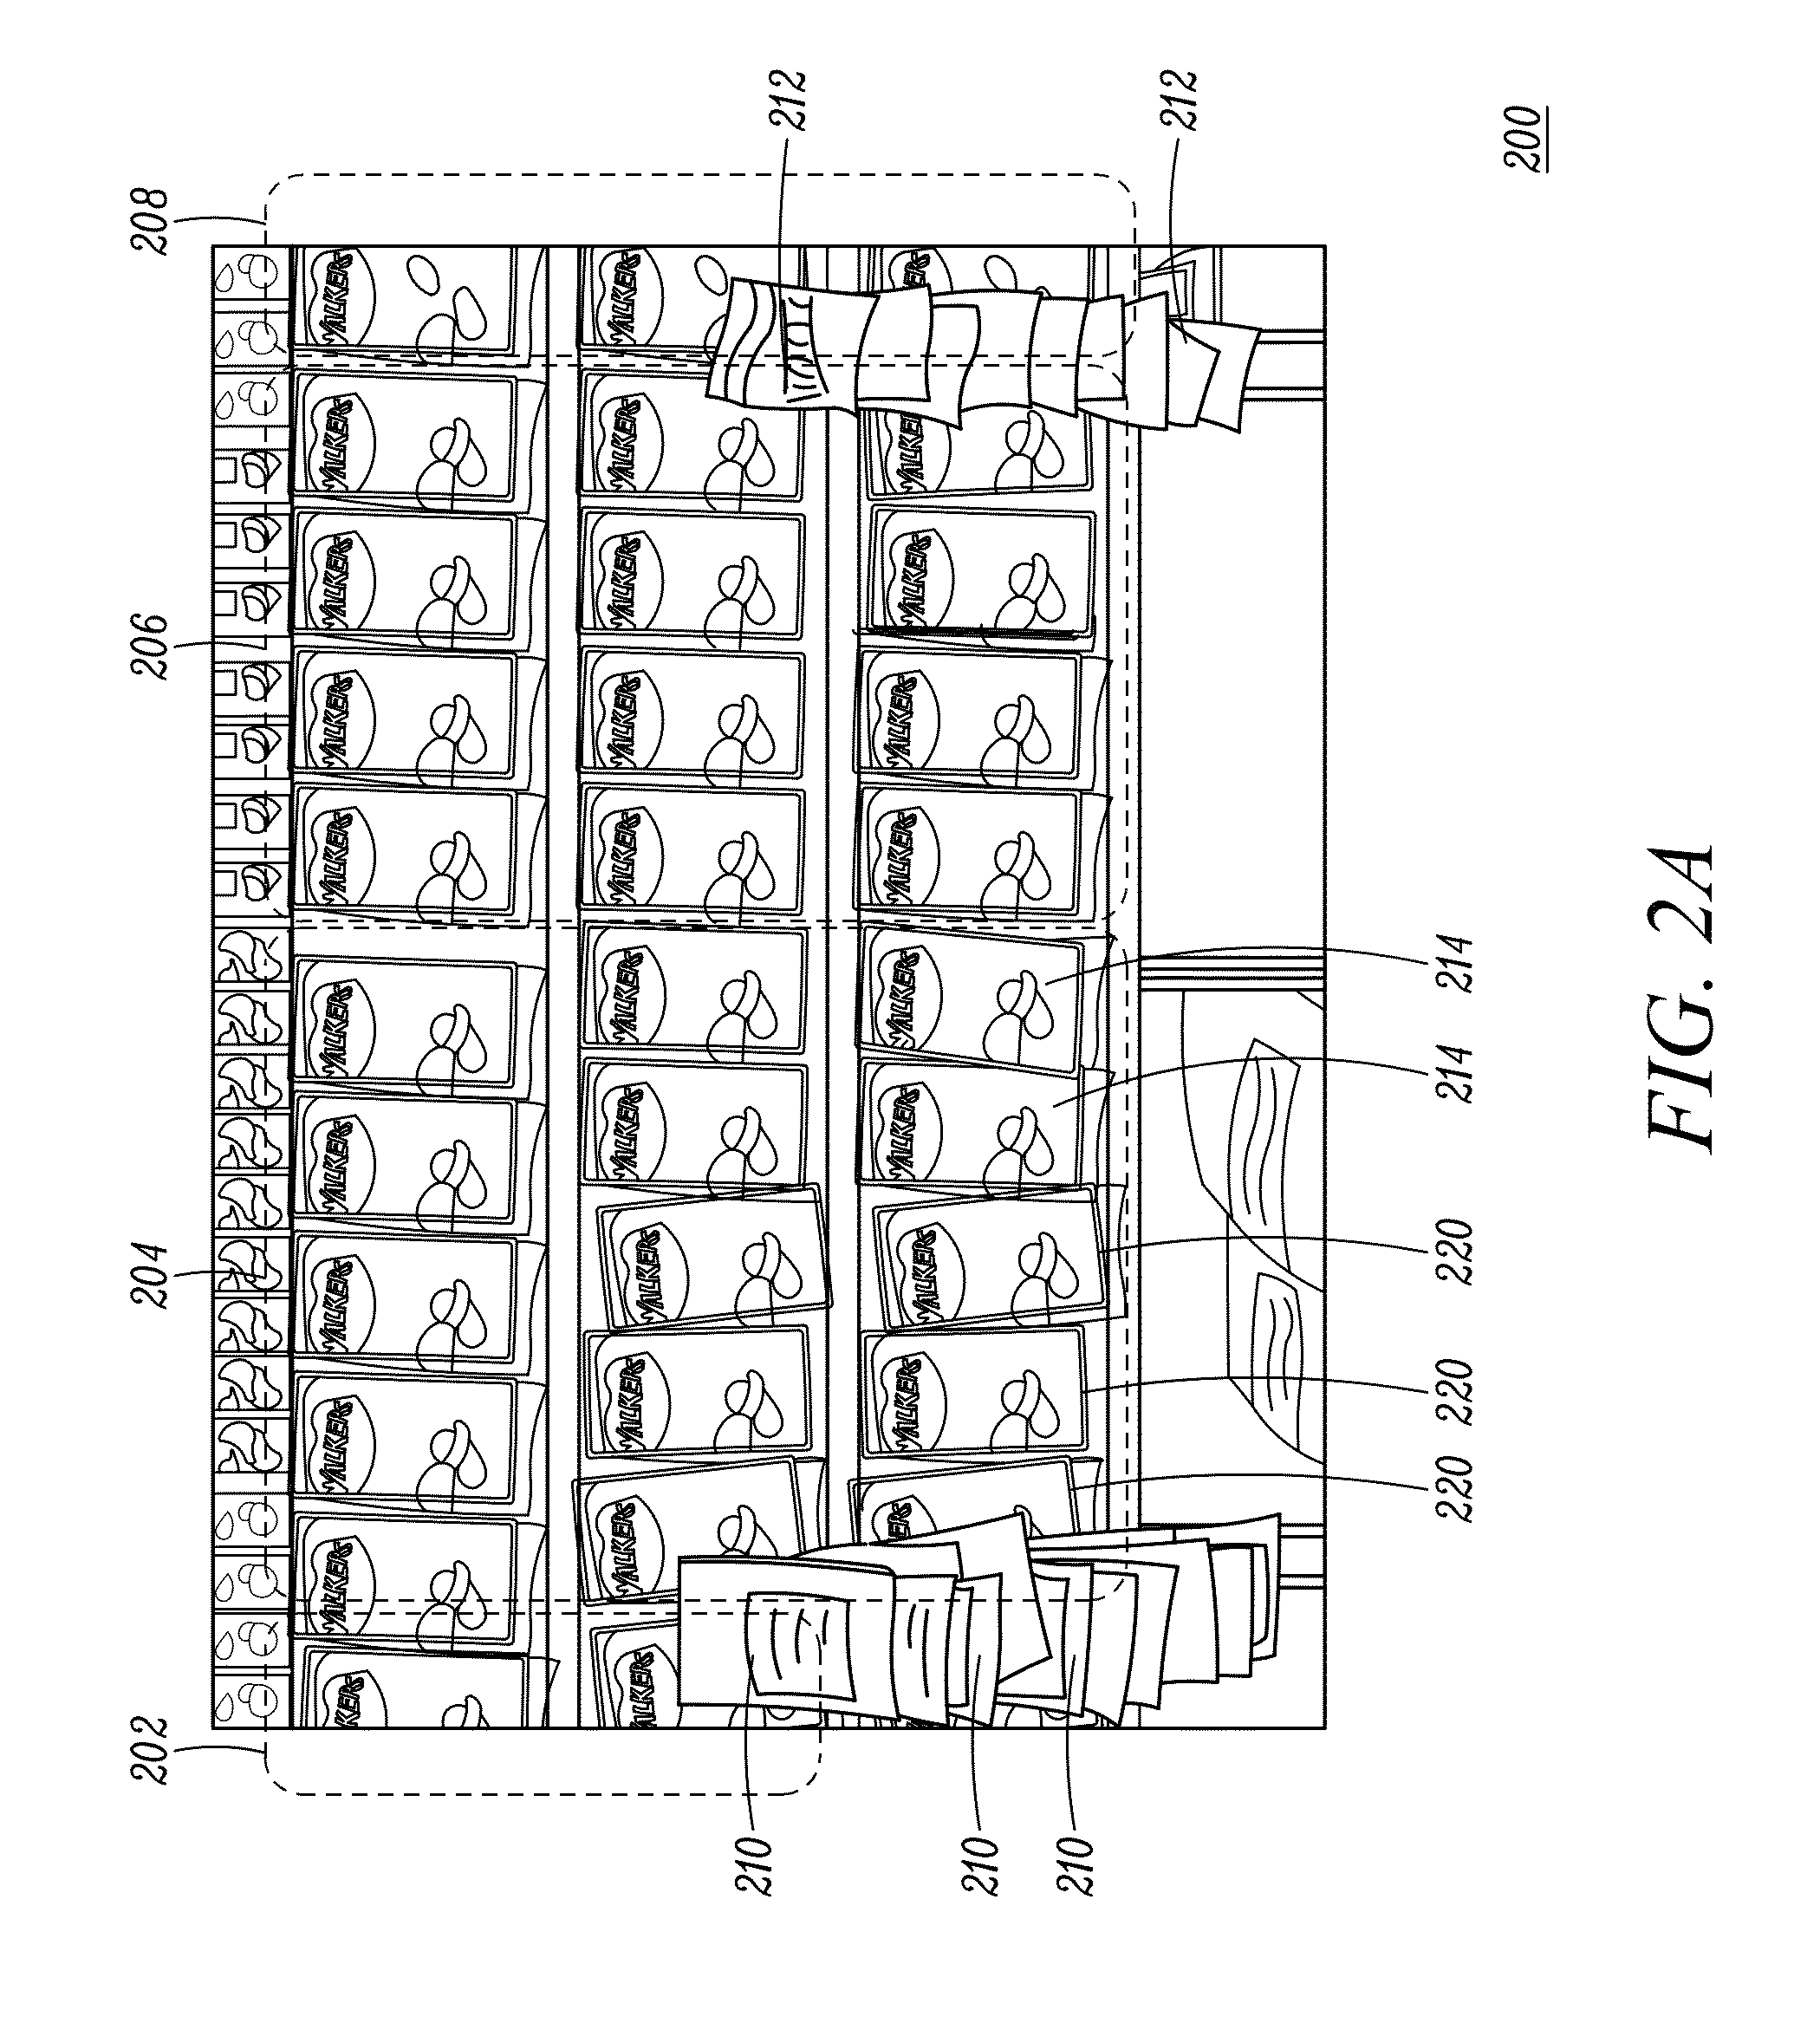 Method for detecting a plurality of instances of an object